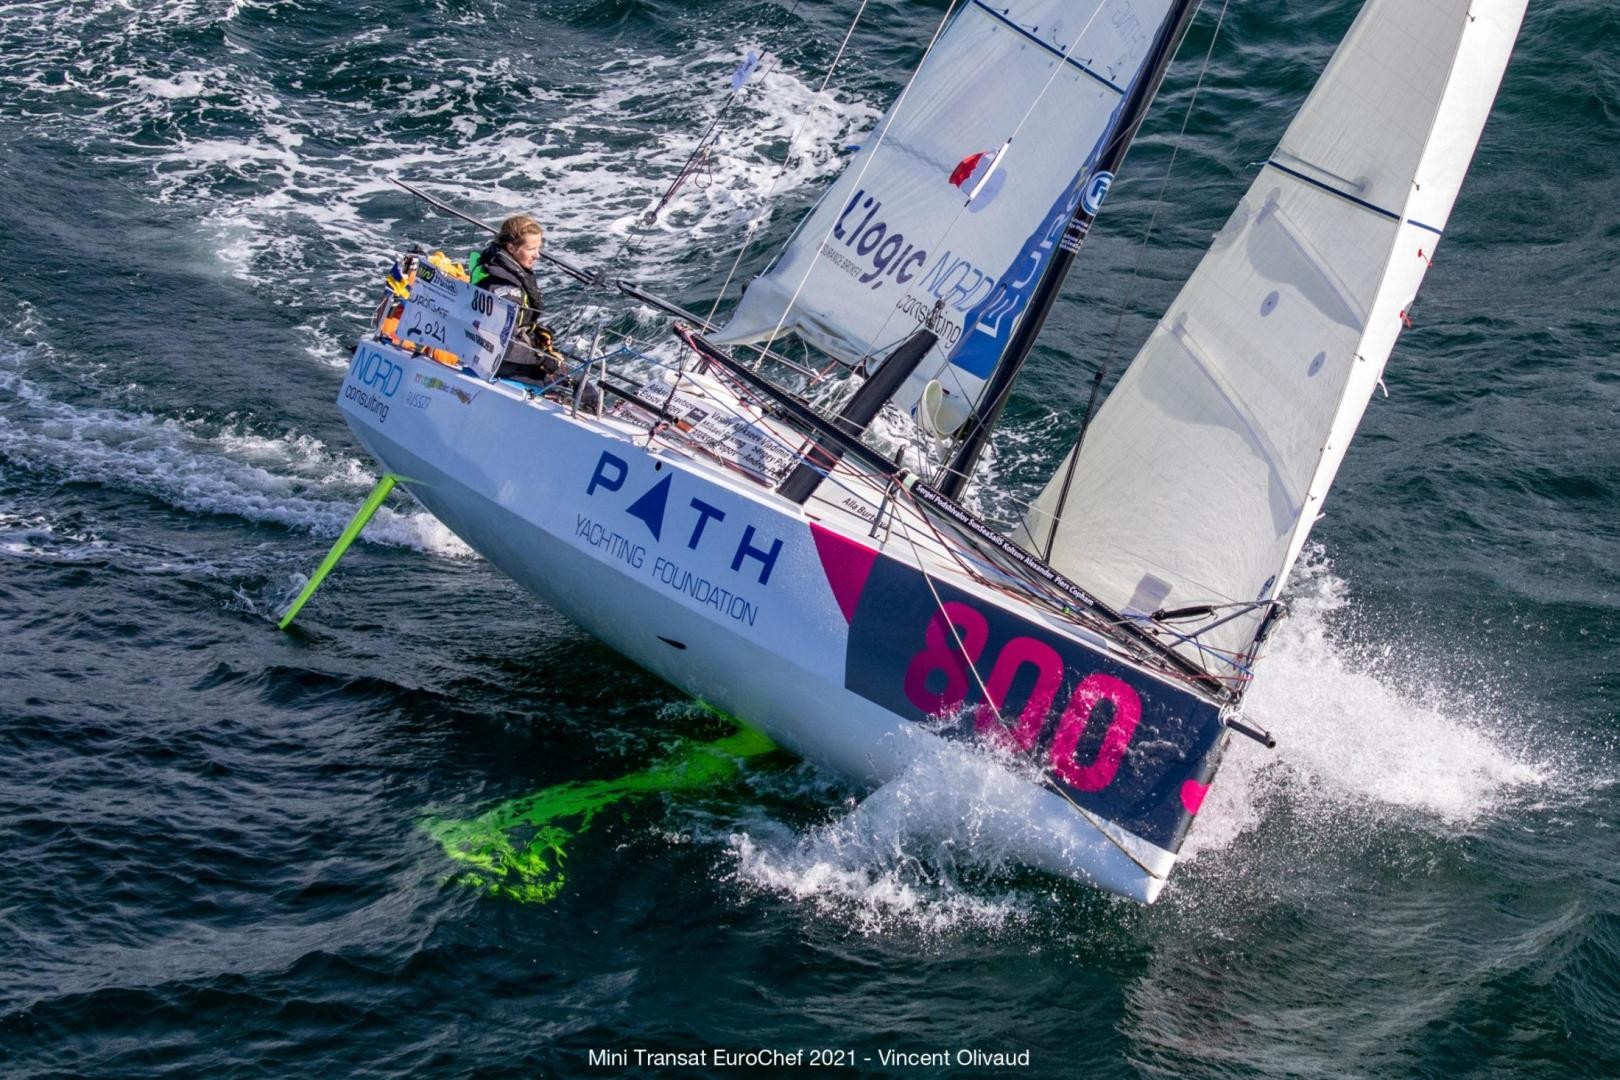 Mini Transat EuroChef 2021: one front, two tactical options